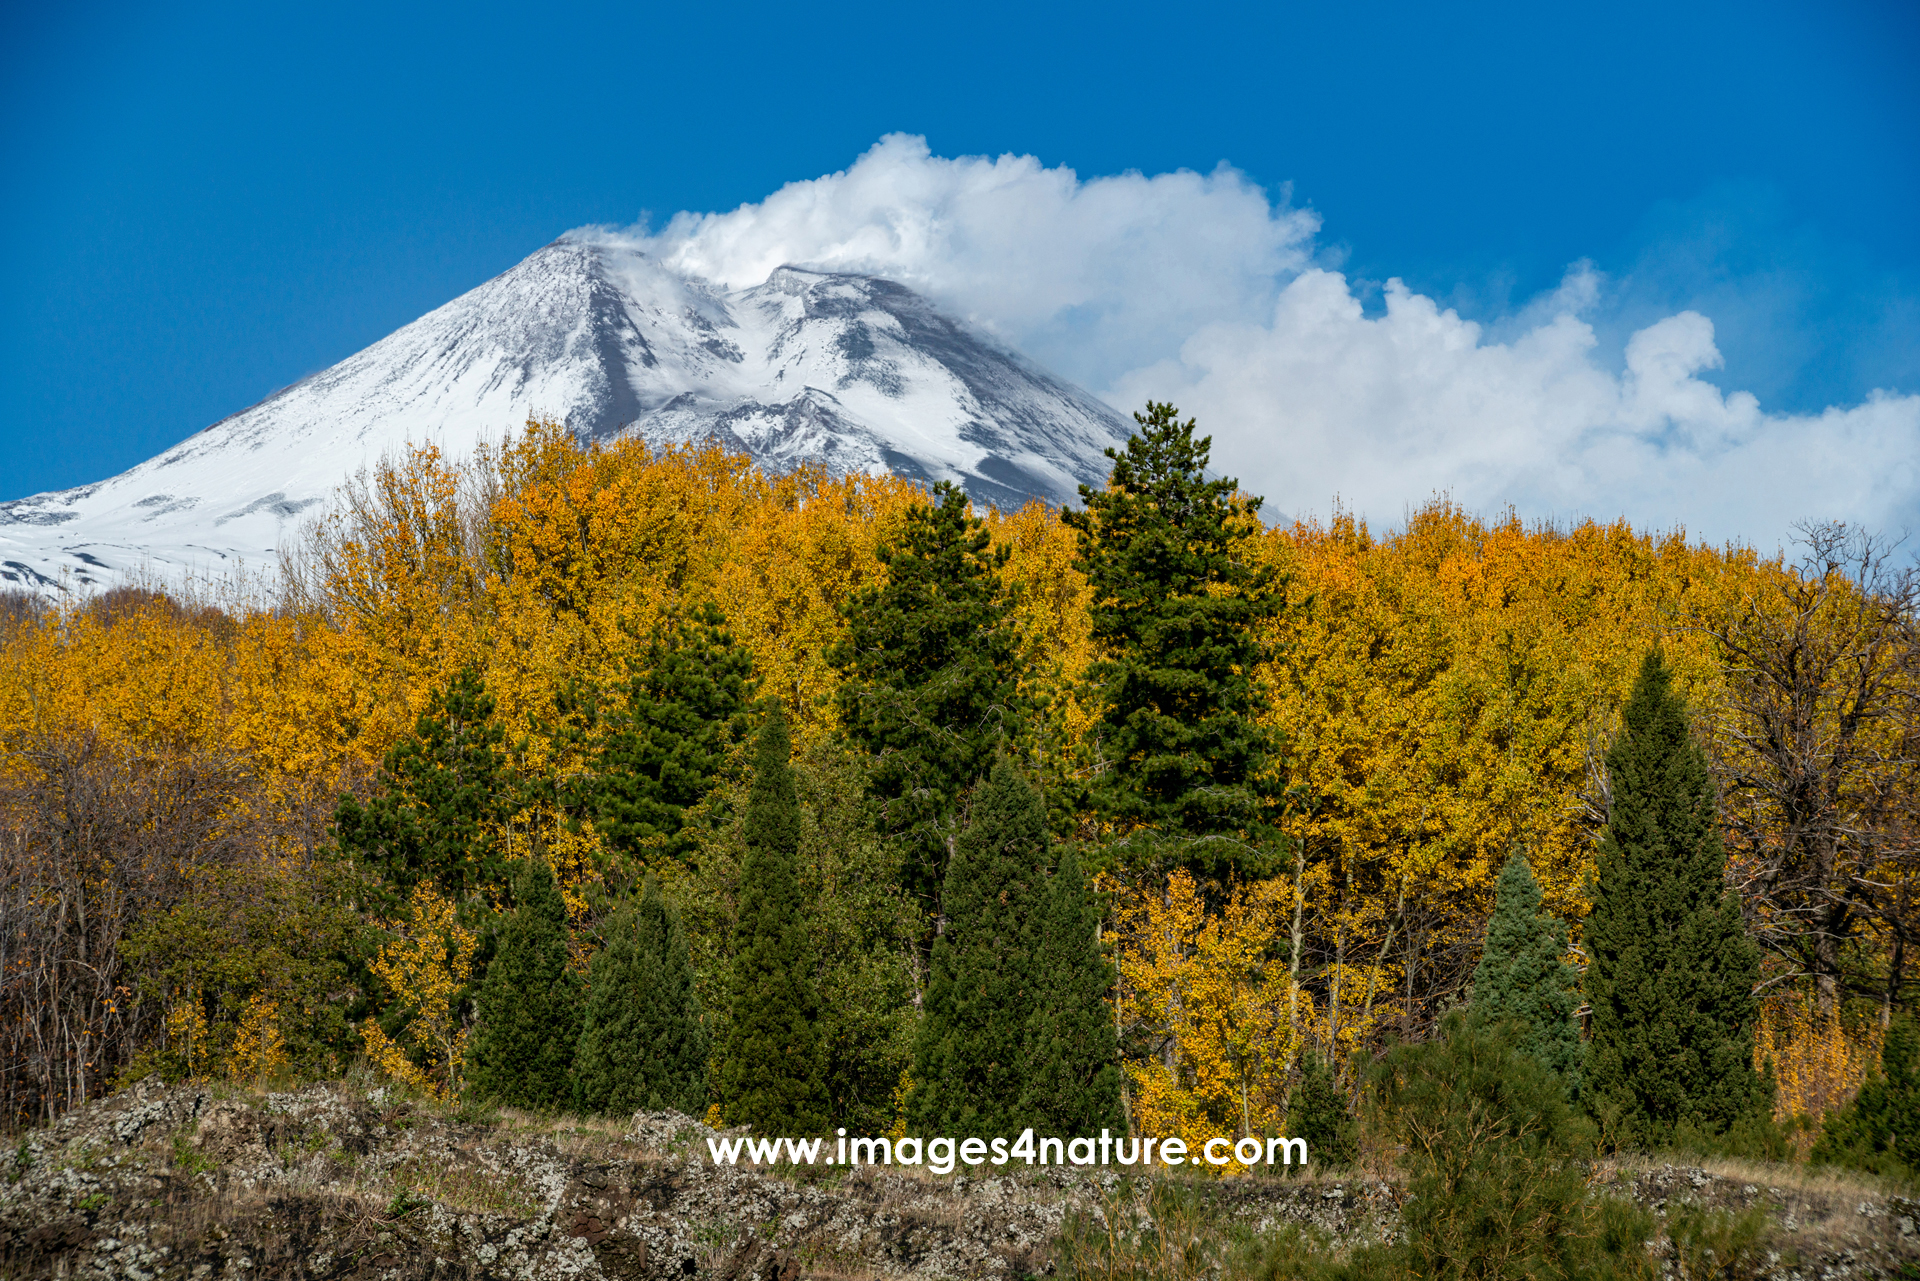 Fuming snow covered volcano overlooking colorful autumn forest